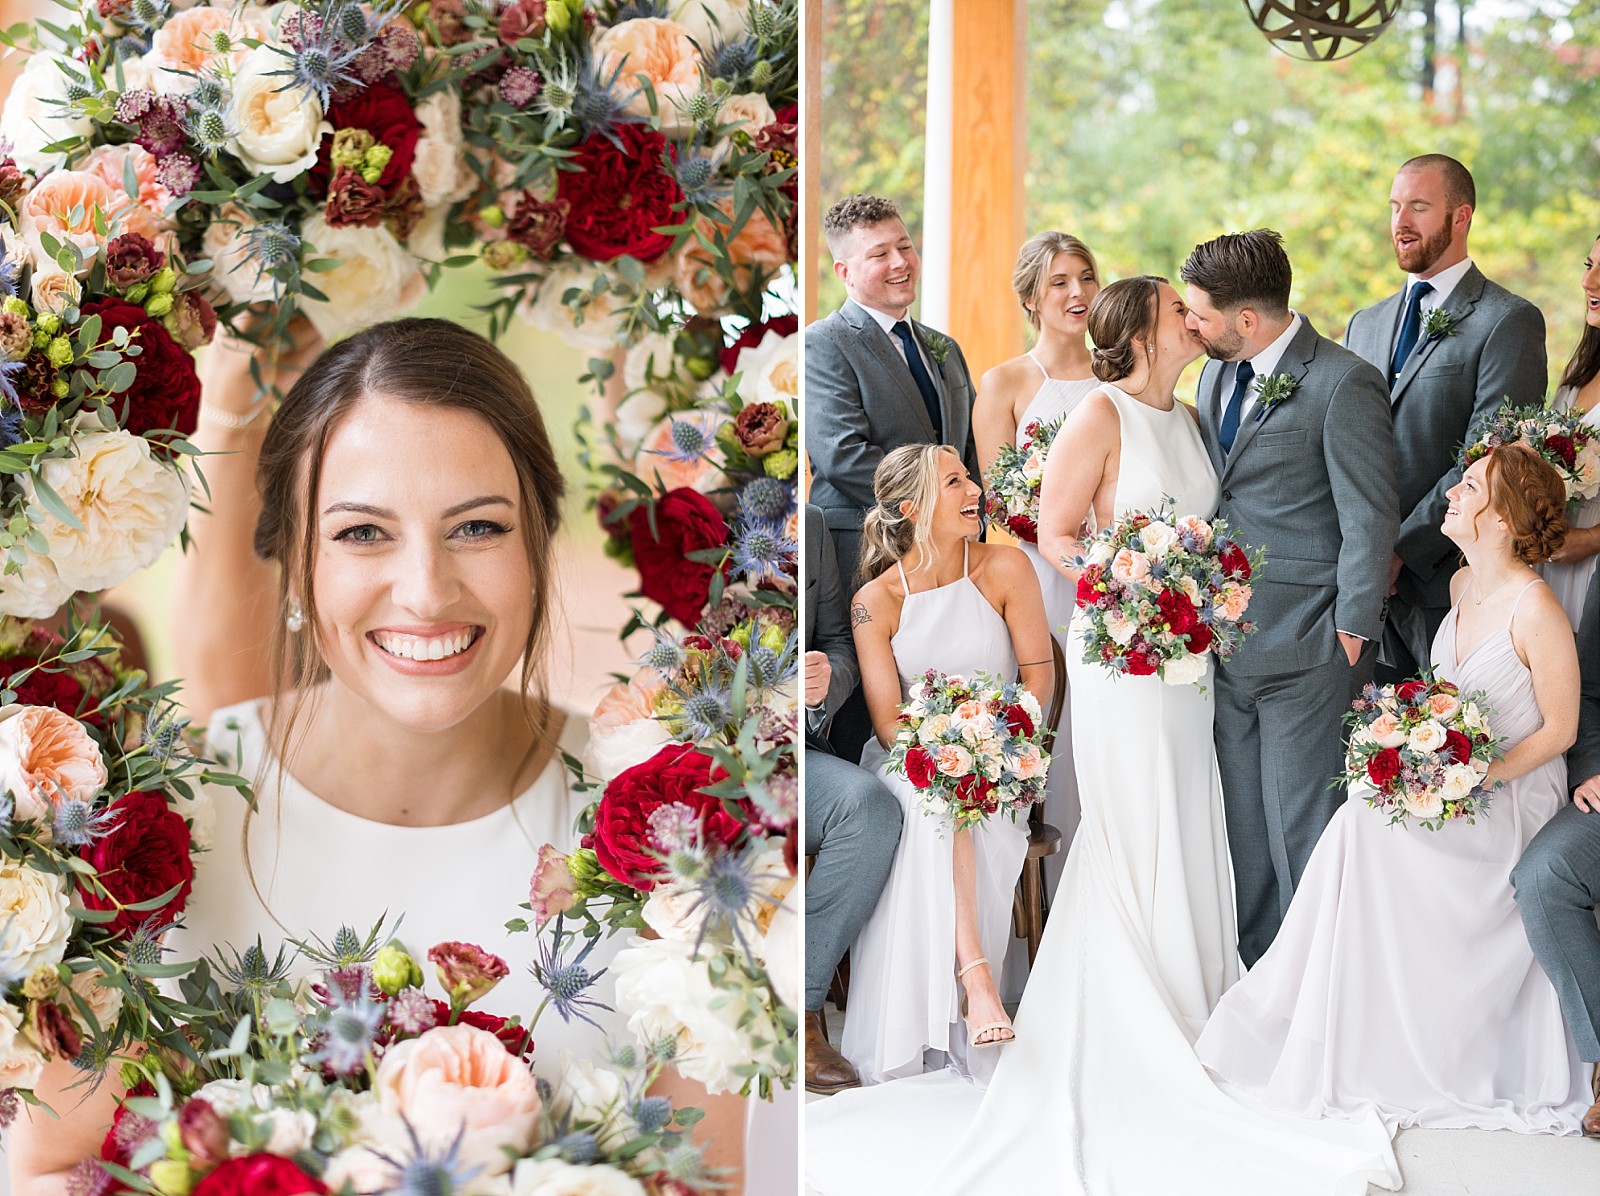 Bride surrounded by bridal bouquet  |The Upchurch in Cary NC | Raleigh NC Wedding Photography